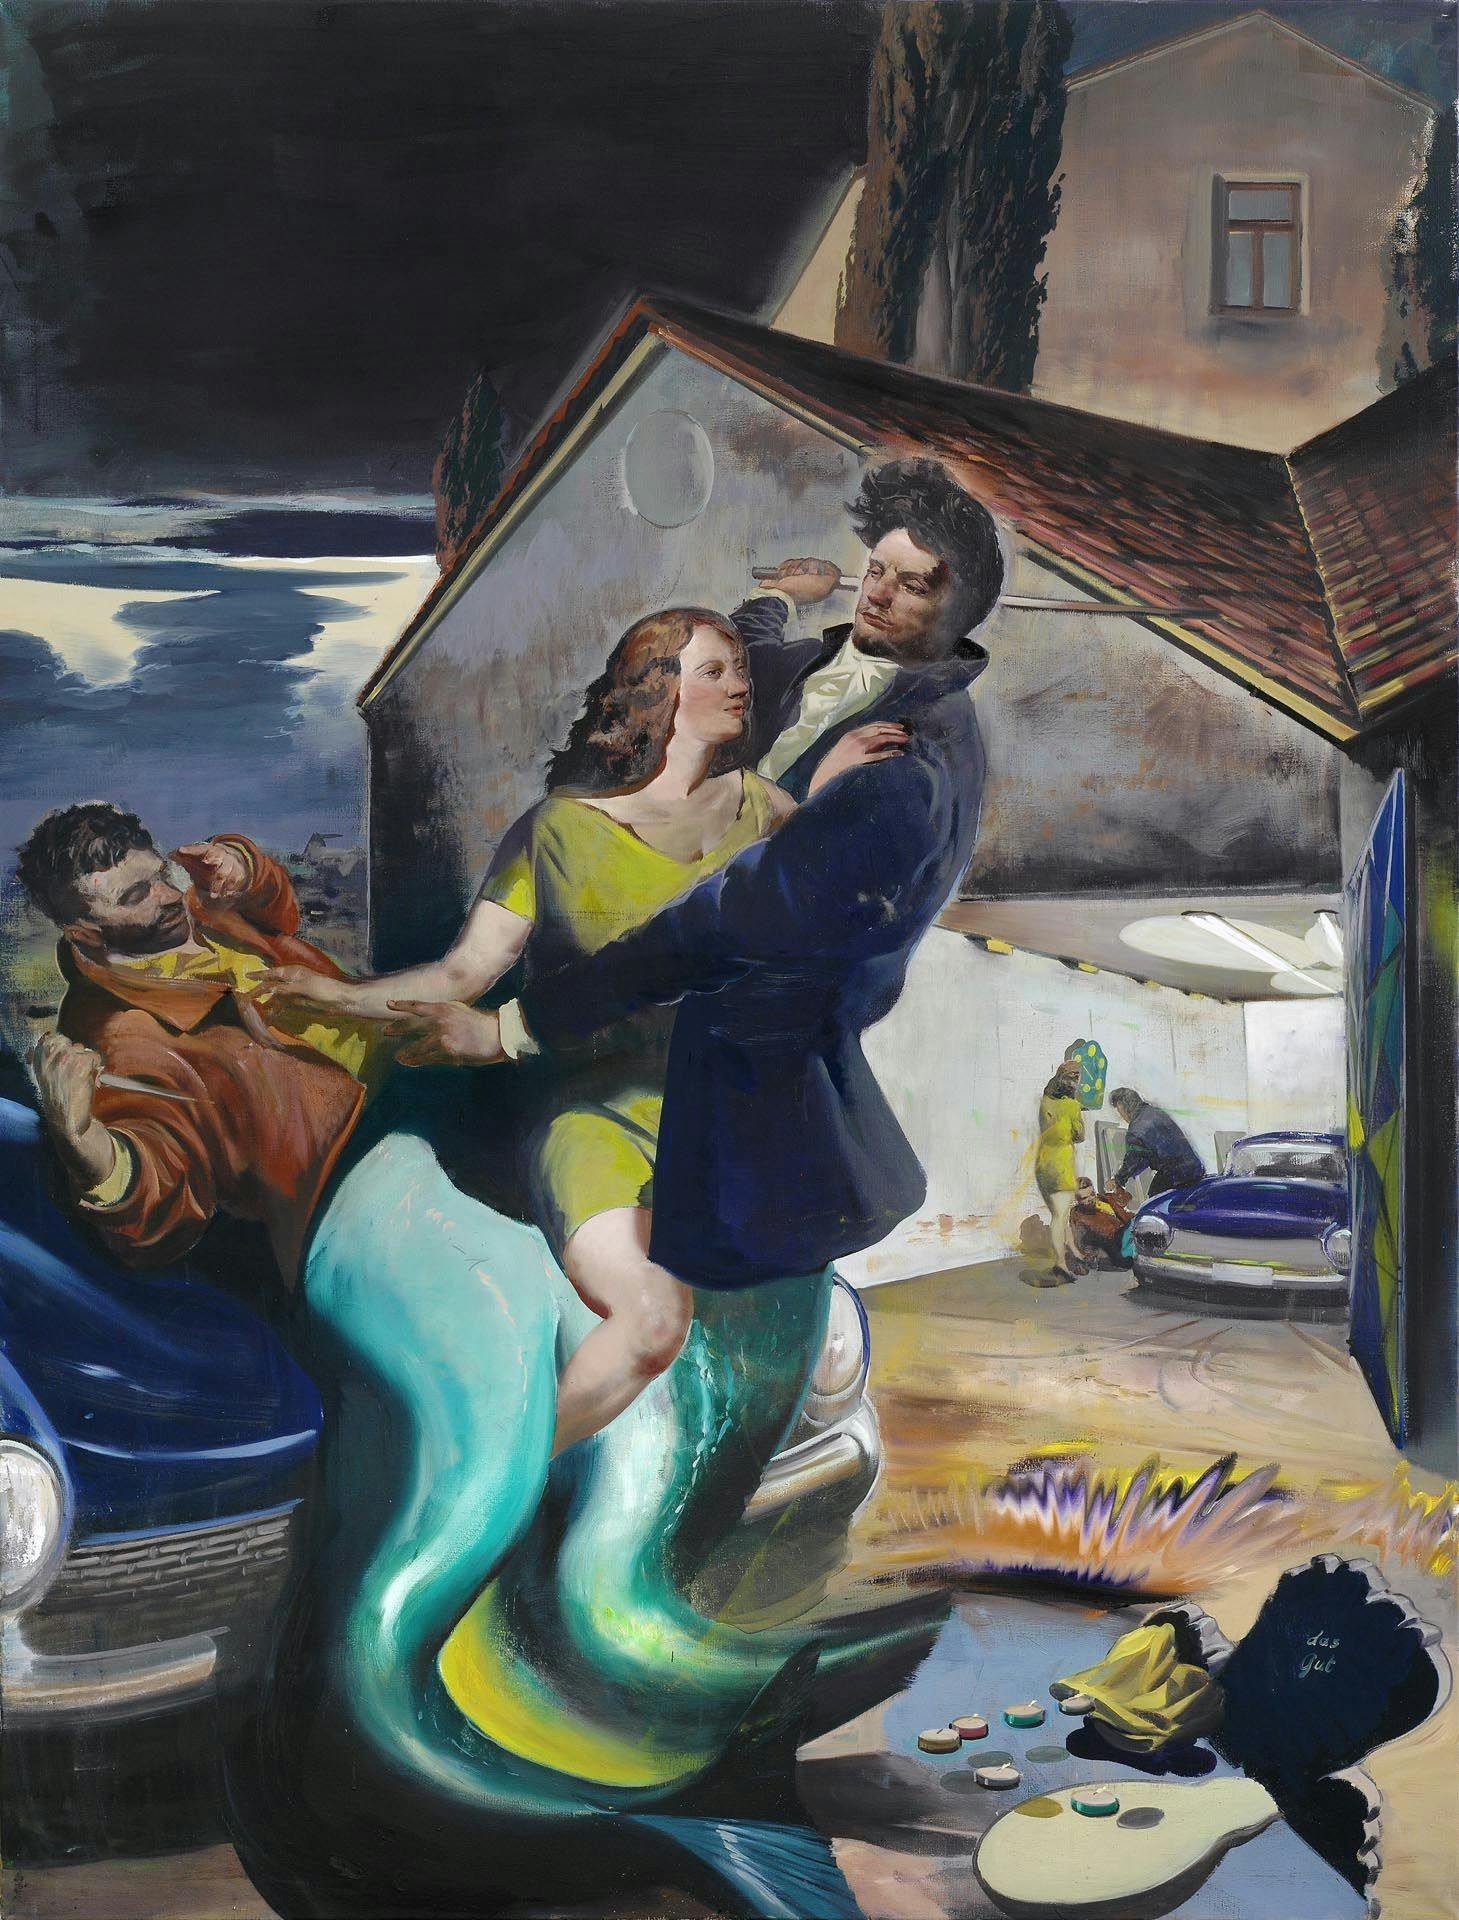 A painting by Neo Rauch, titled Das Gut, dated 2008.